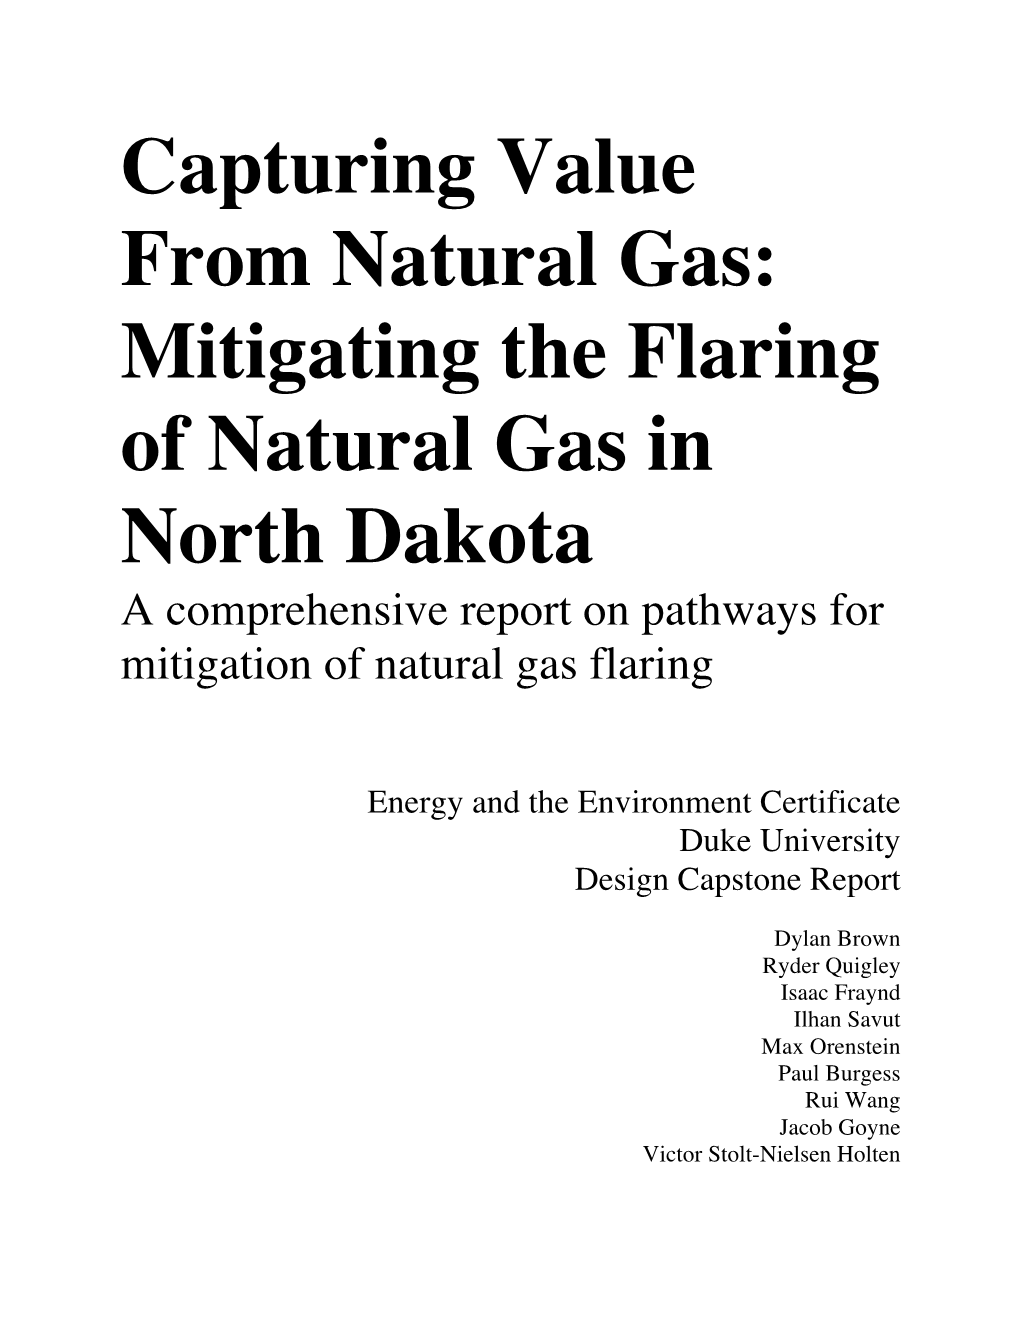 Mitigating the Flaring of Natural Gas in North Dakota a Comprehensive Report on Pathways for Mitigation of Natural Gas Flaring